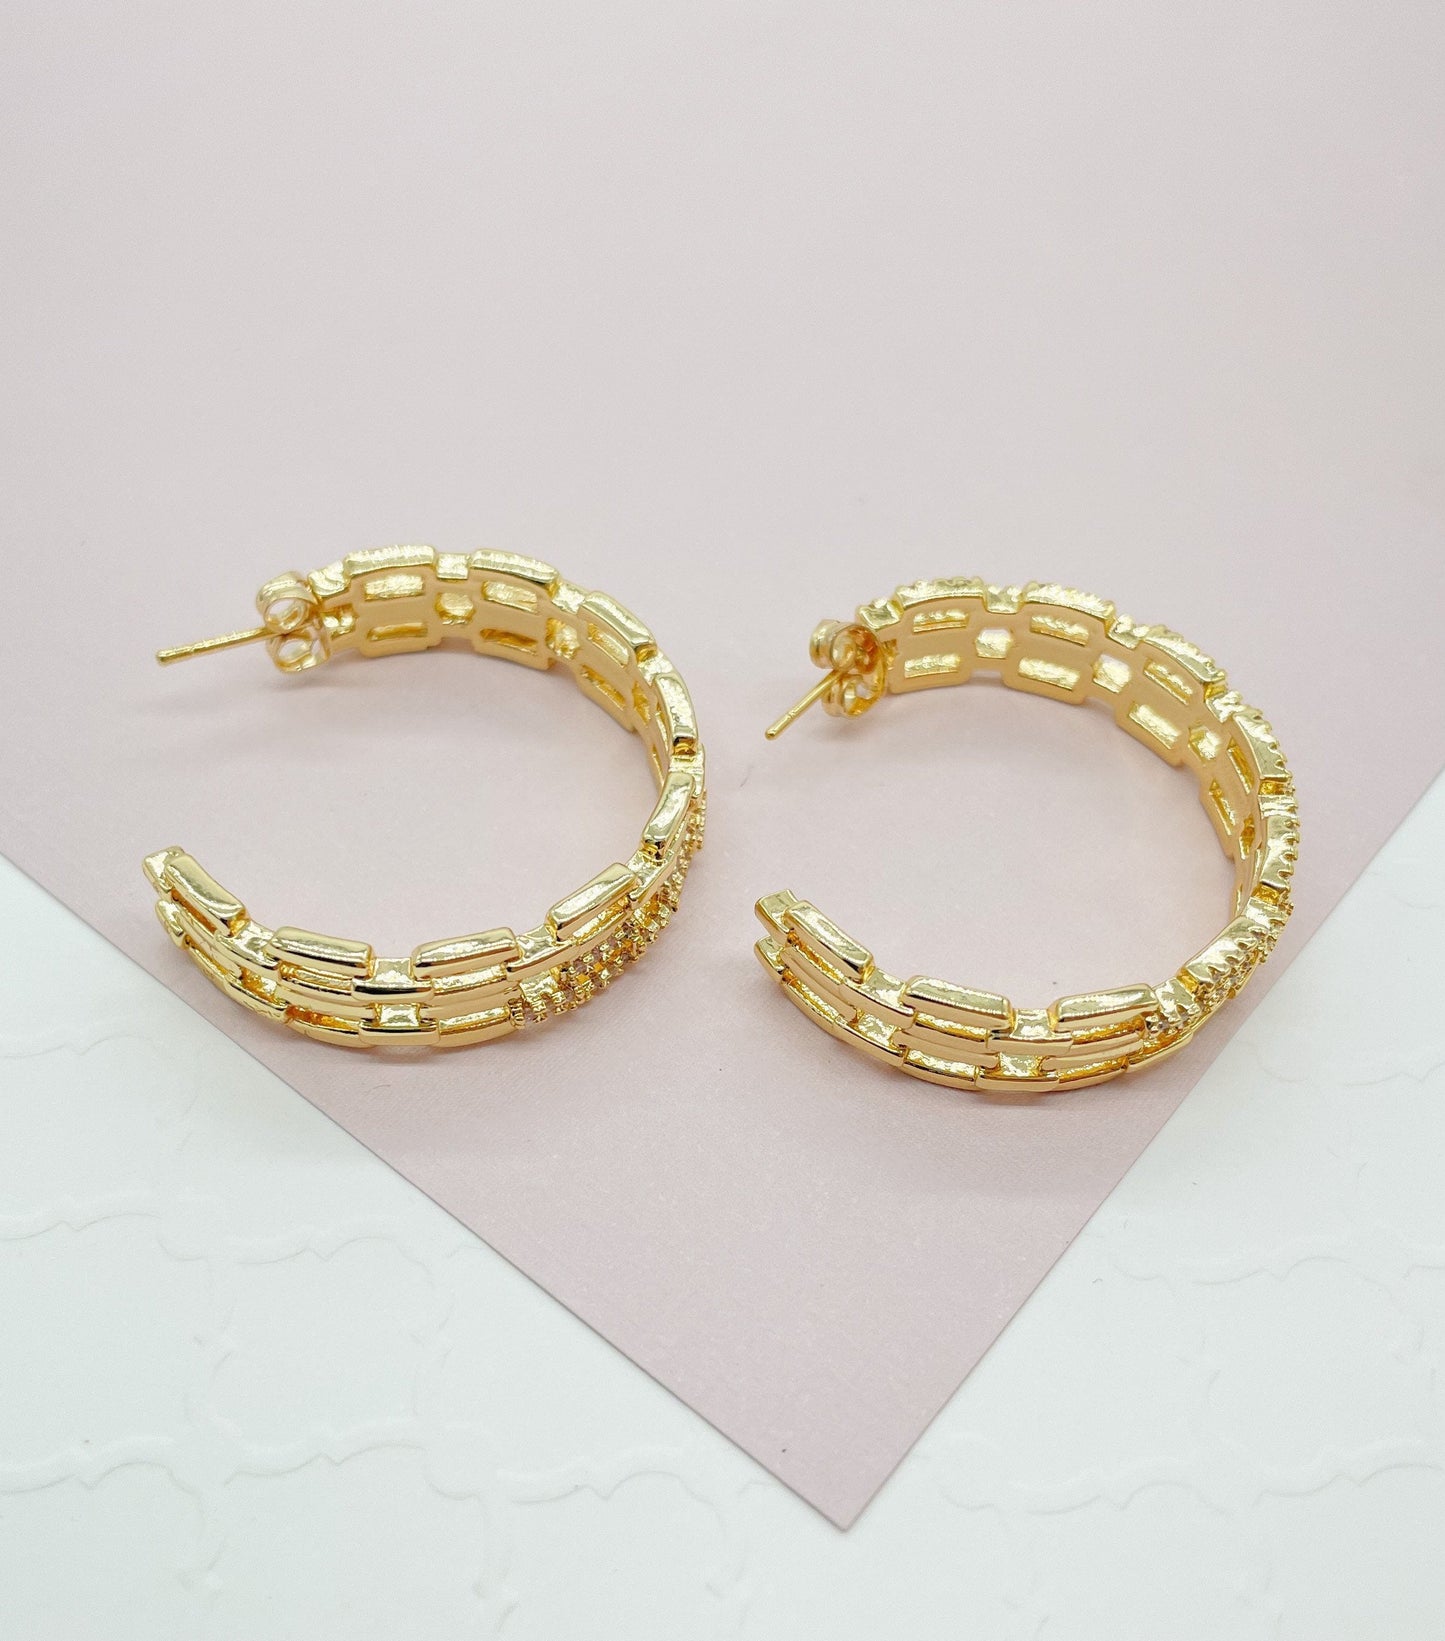 18k Gold Layered Chain Link Hoop Earrings Featuring Cubic Zirconia, Dainty Curb